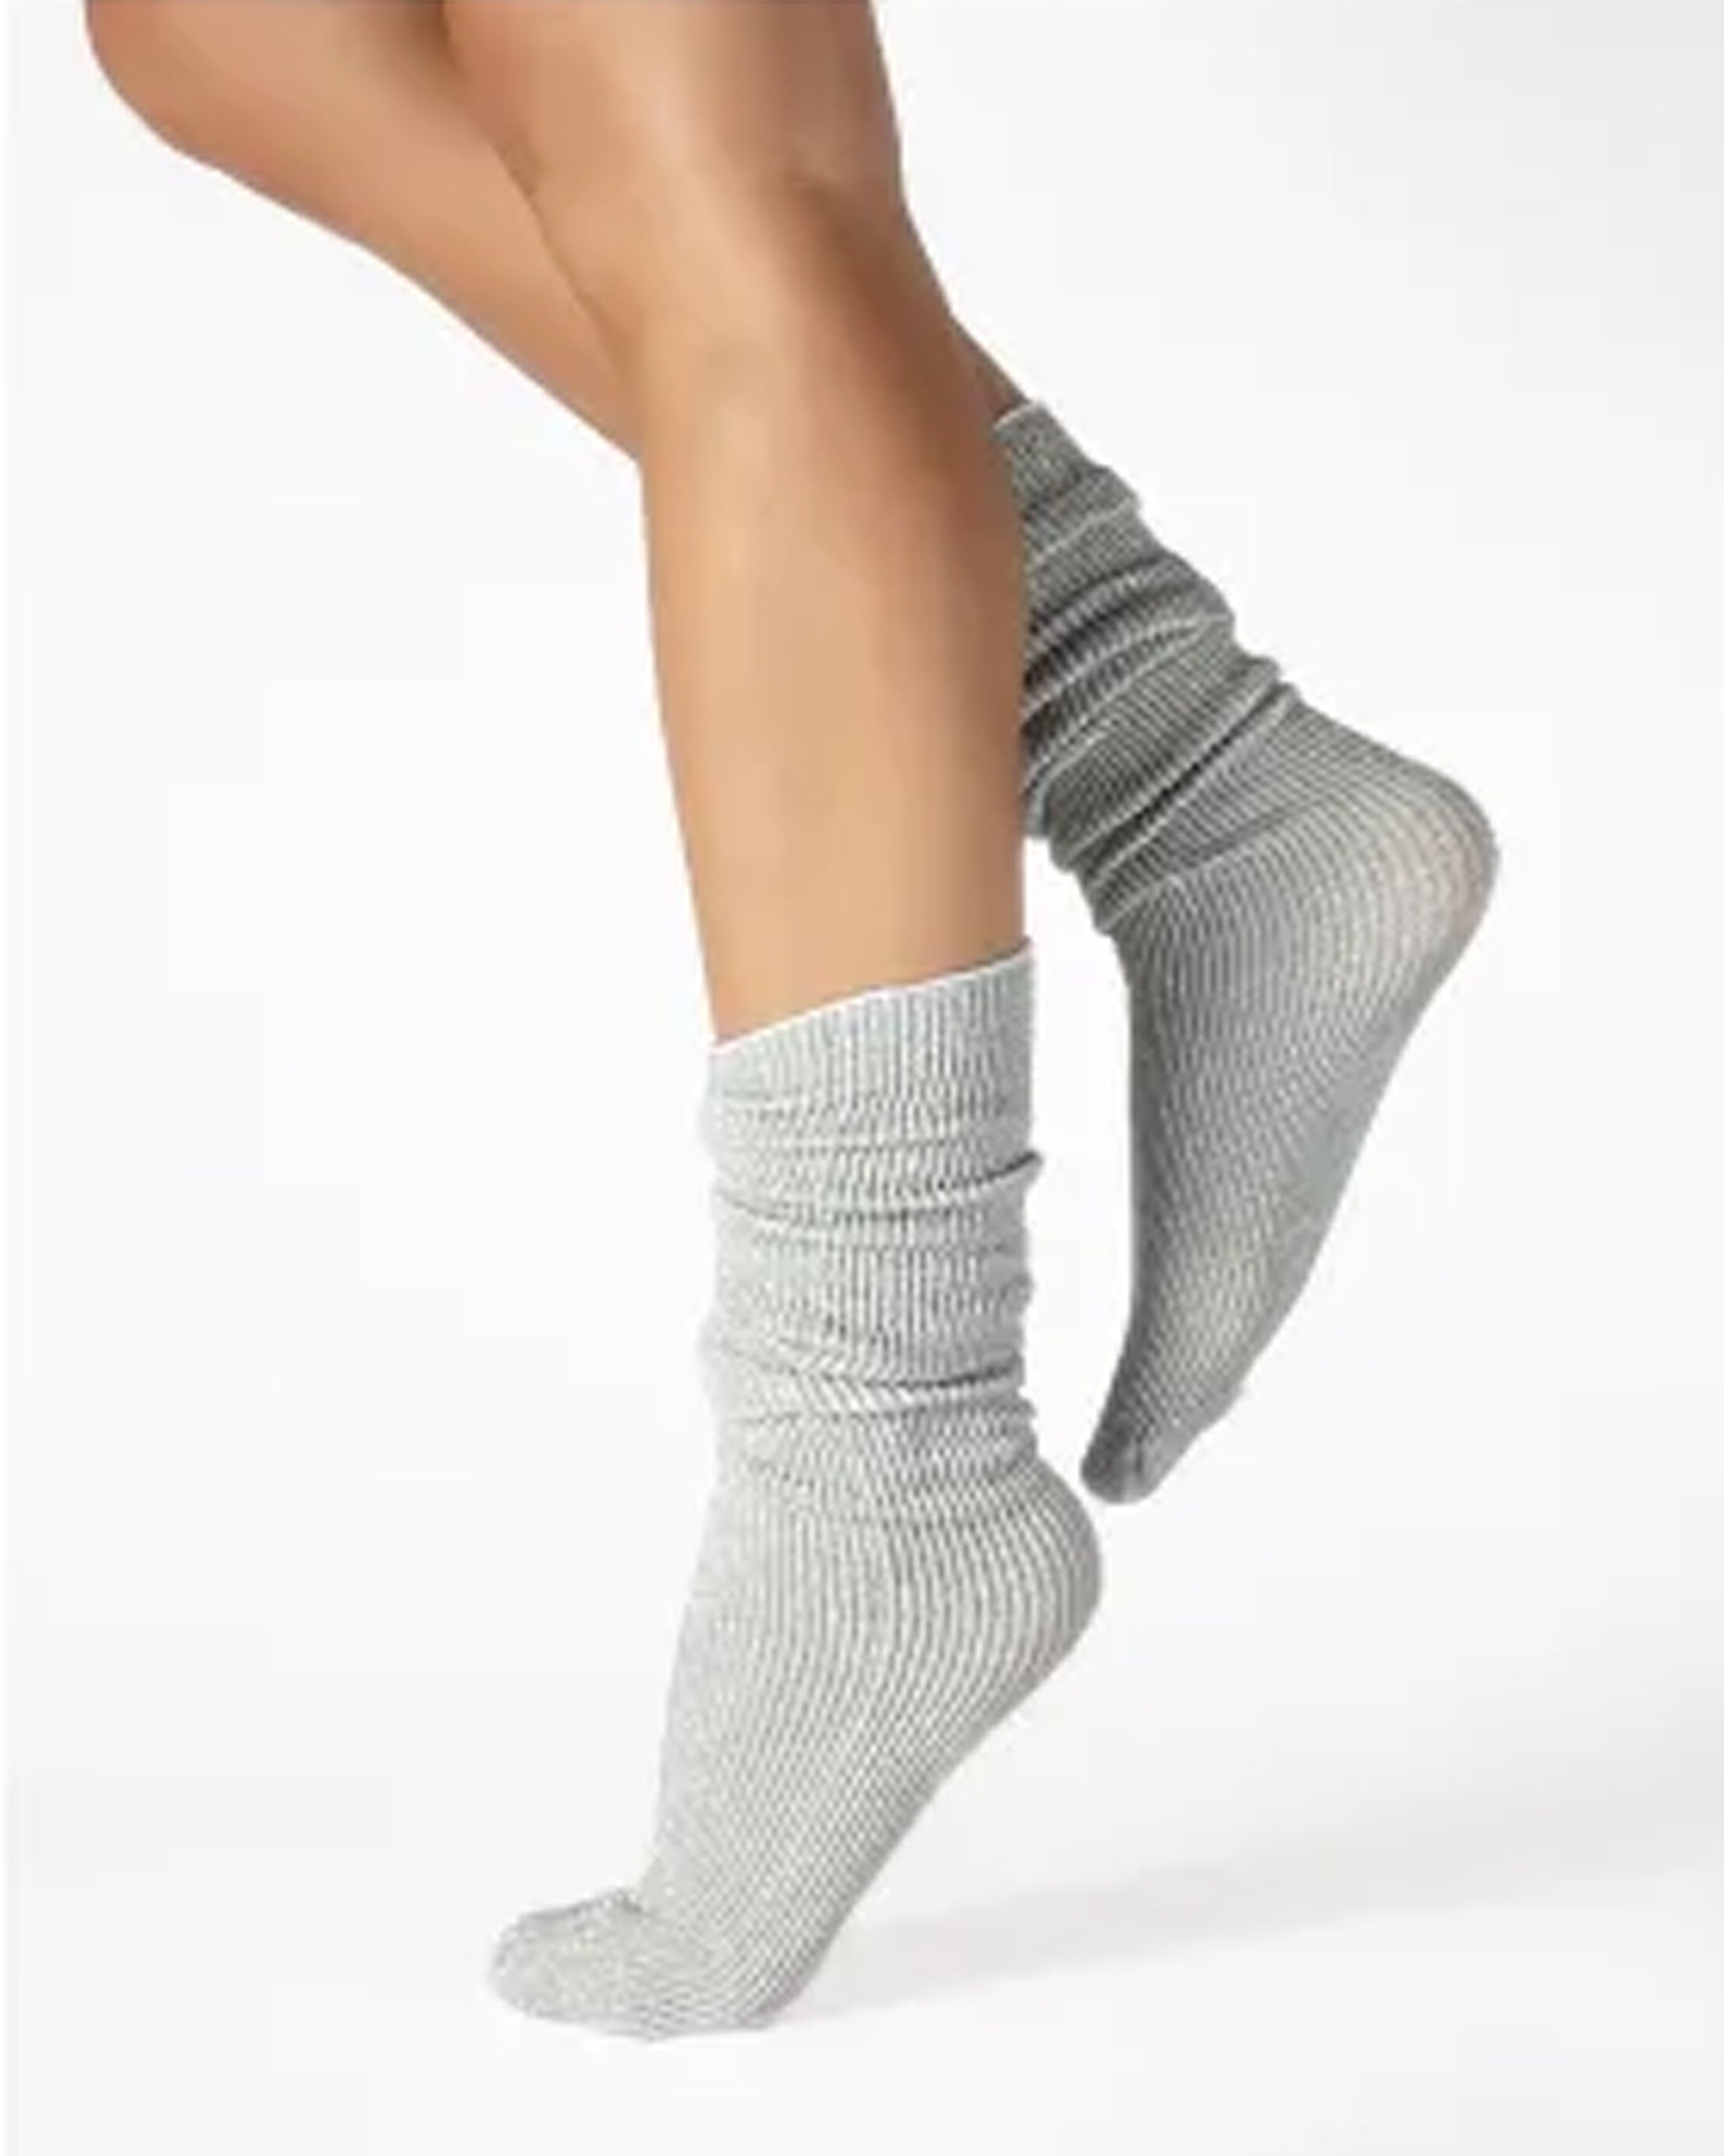 Calzitaly Glitter Rib Sock - Silver grey opaque scrunched down ankle fashion ribbed socks with silver lamé